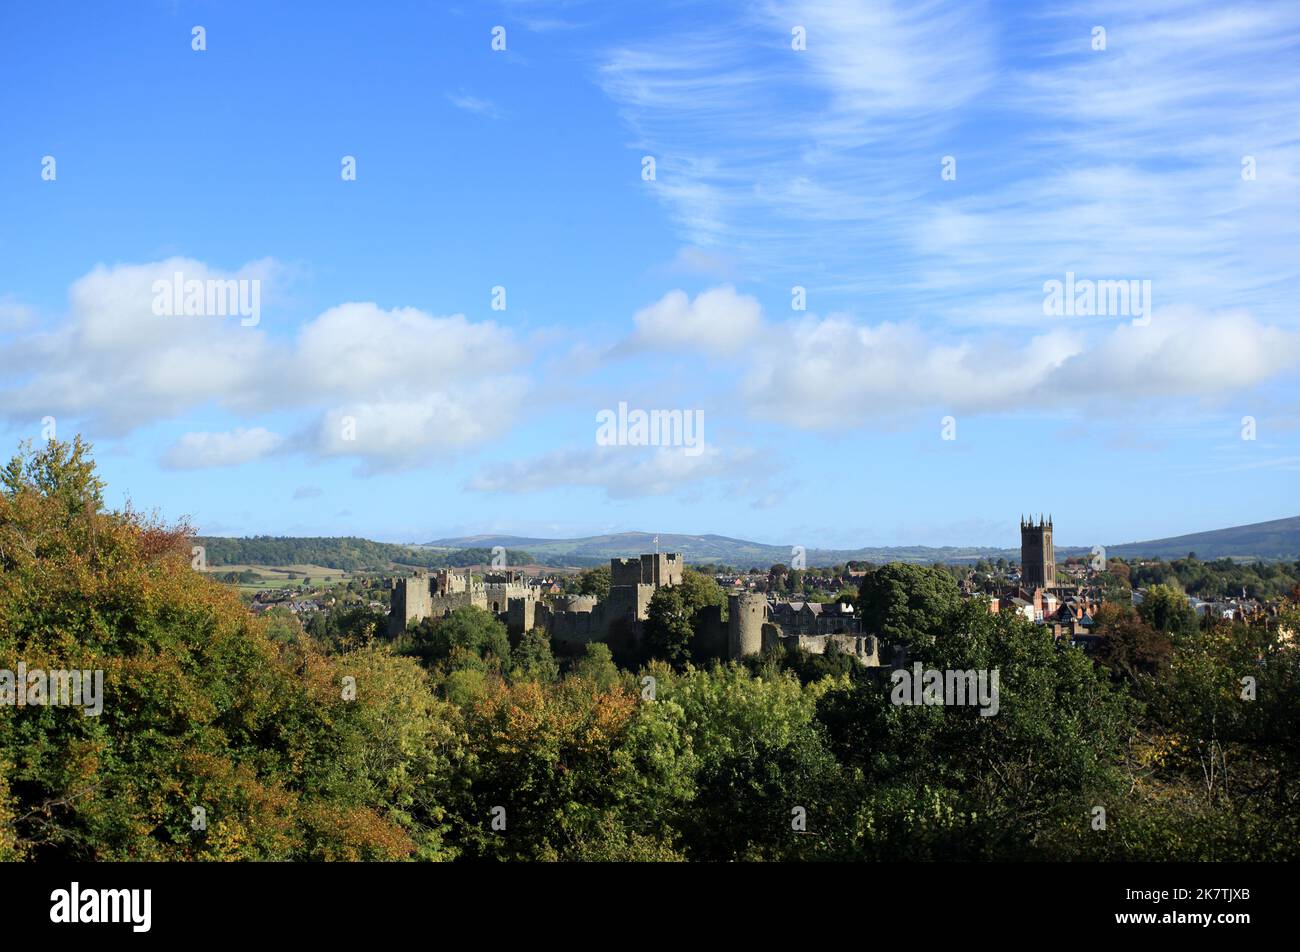 View of Ludlow castle from Whitcliffe common nature reserve, Shropshire, England, UK. Stock Photo